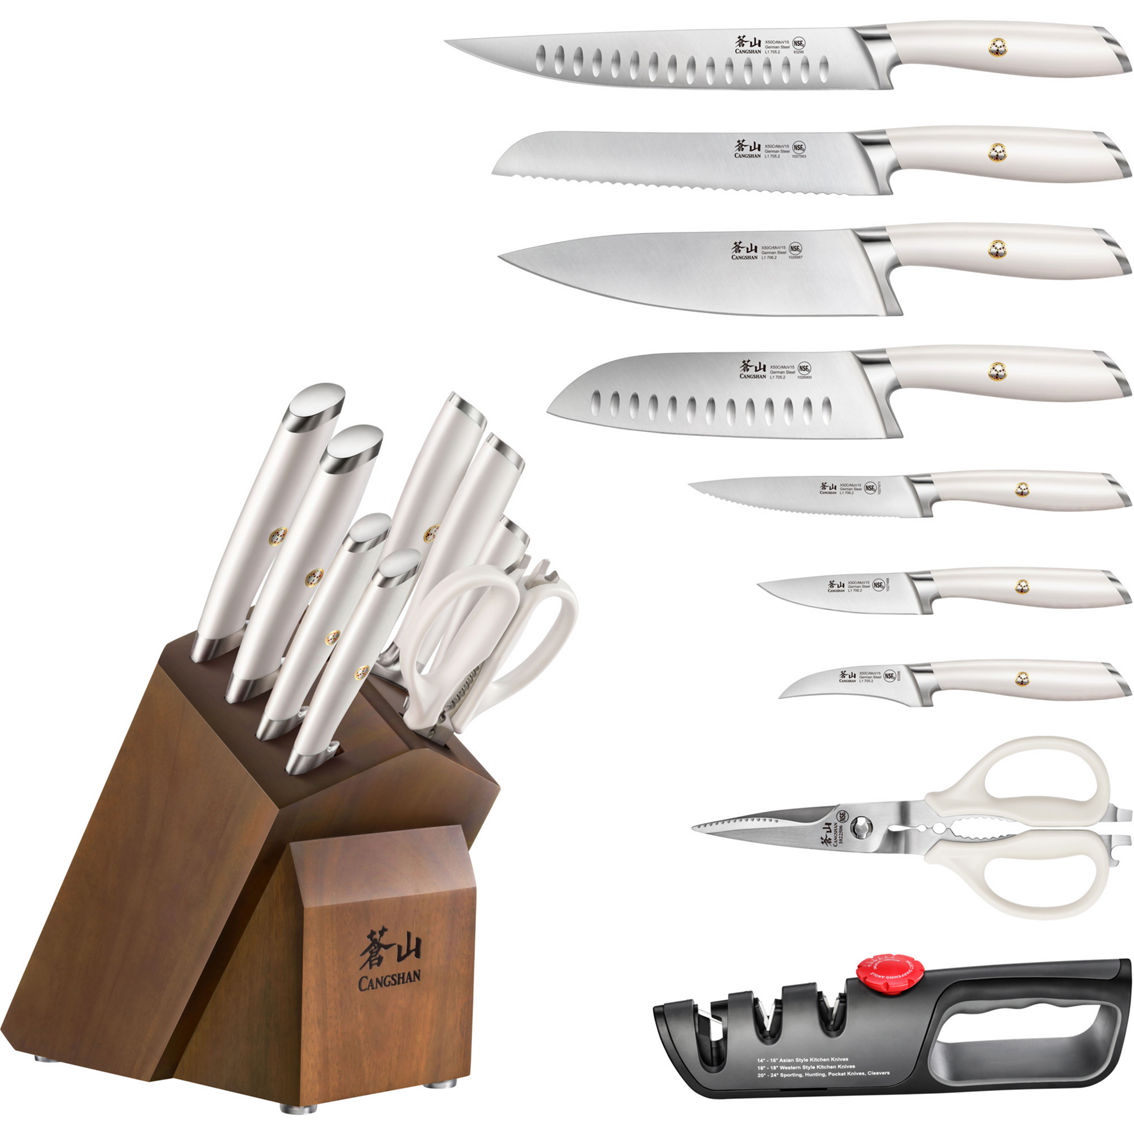 Cangshan Cutlery L1 Series White 10 pc. Forged Knife Block Set - Image 3 of 6